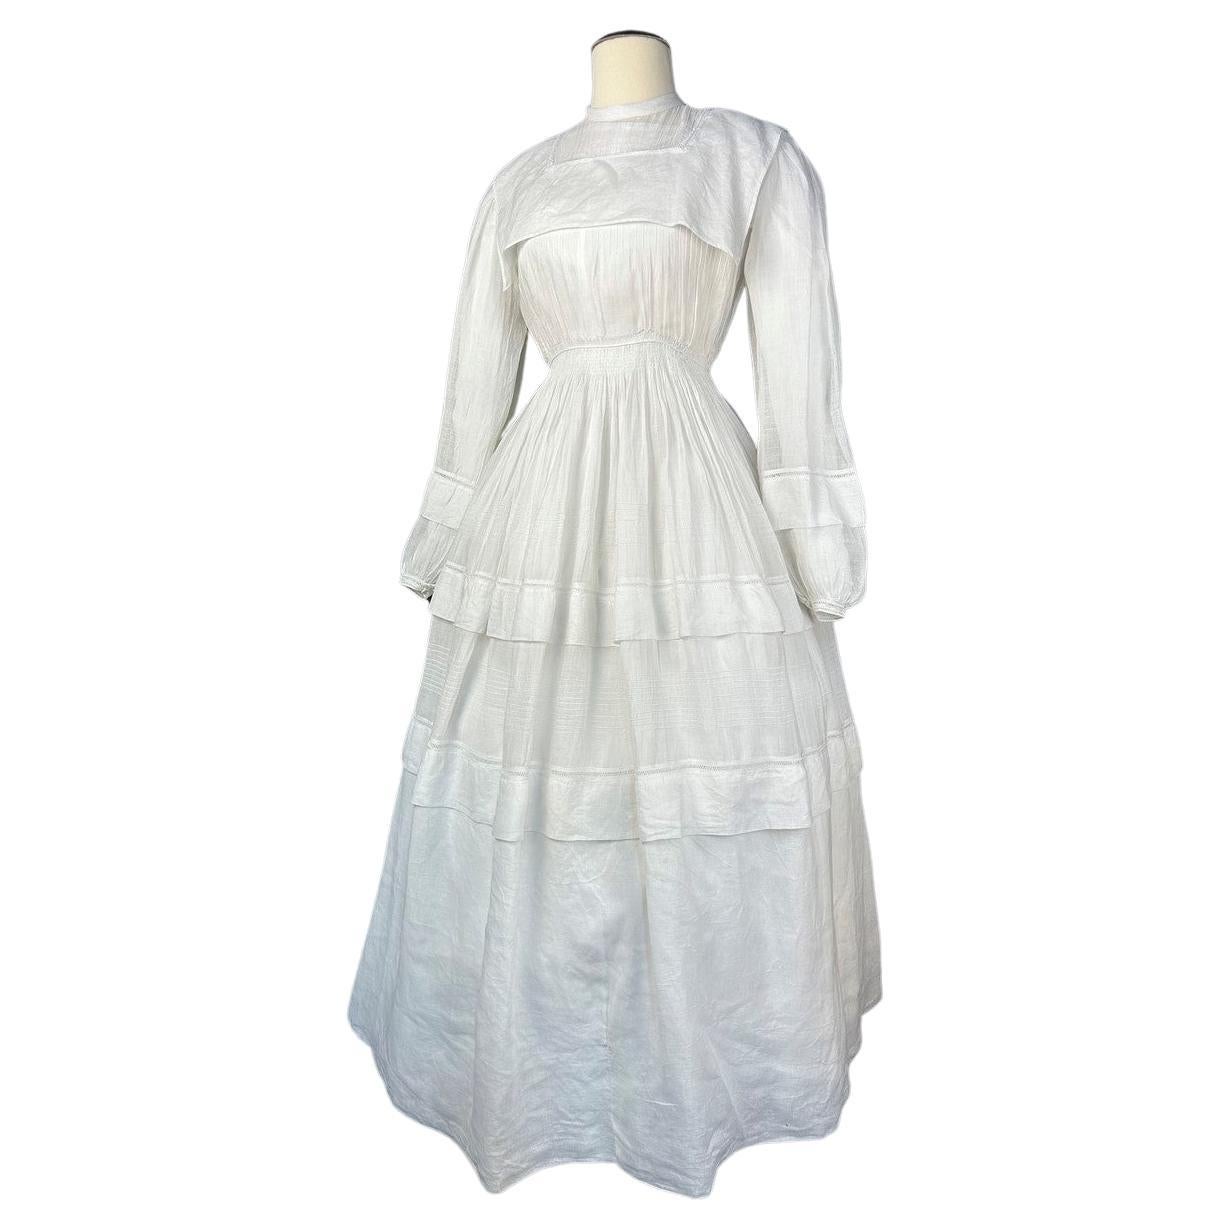 Circa 1855
France or Europe
Precious white cotton muslin or organza round crinoline walker dress dating from the beginning of the Second Empire. Dress with puffed sleeves, folded pleats and closed in the back with small mother-of-pearl buttons. Very